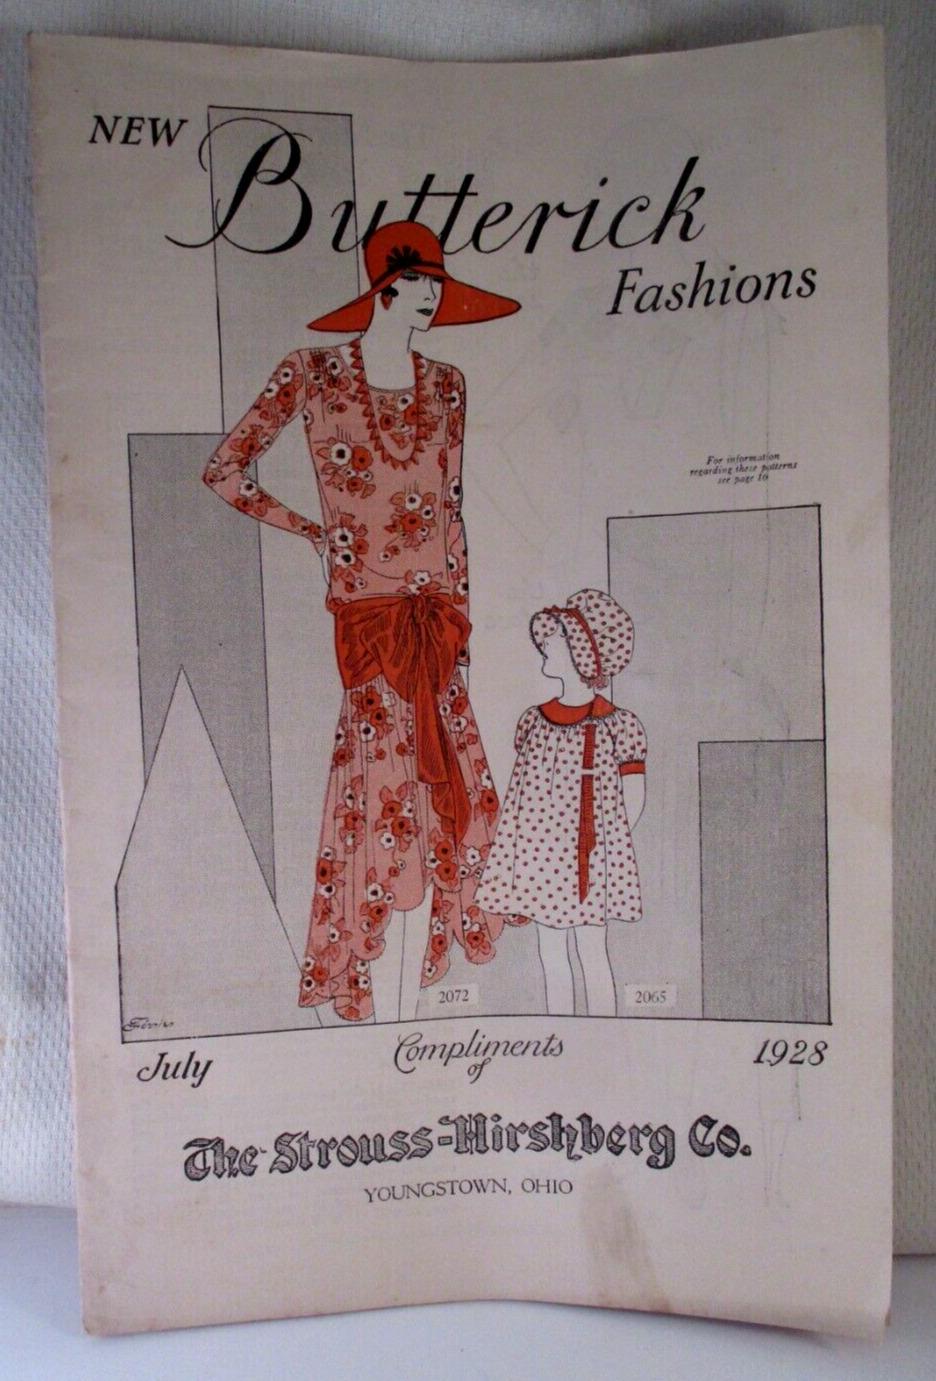 Vtg 1928 BUTTERICK FASHIONS Advertising STROUSS HIRSHBERG YOUNGSTOWN OH BROCHURE